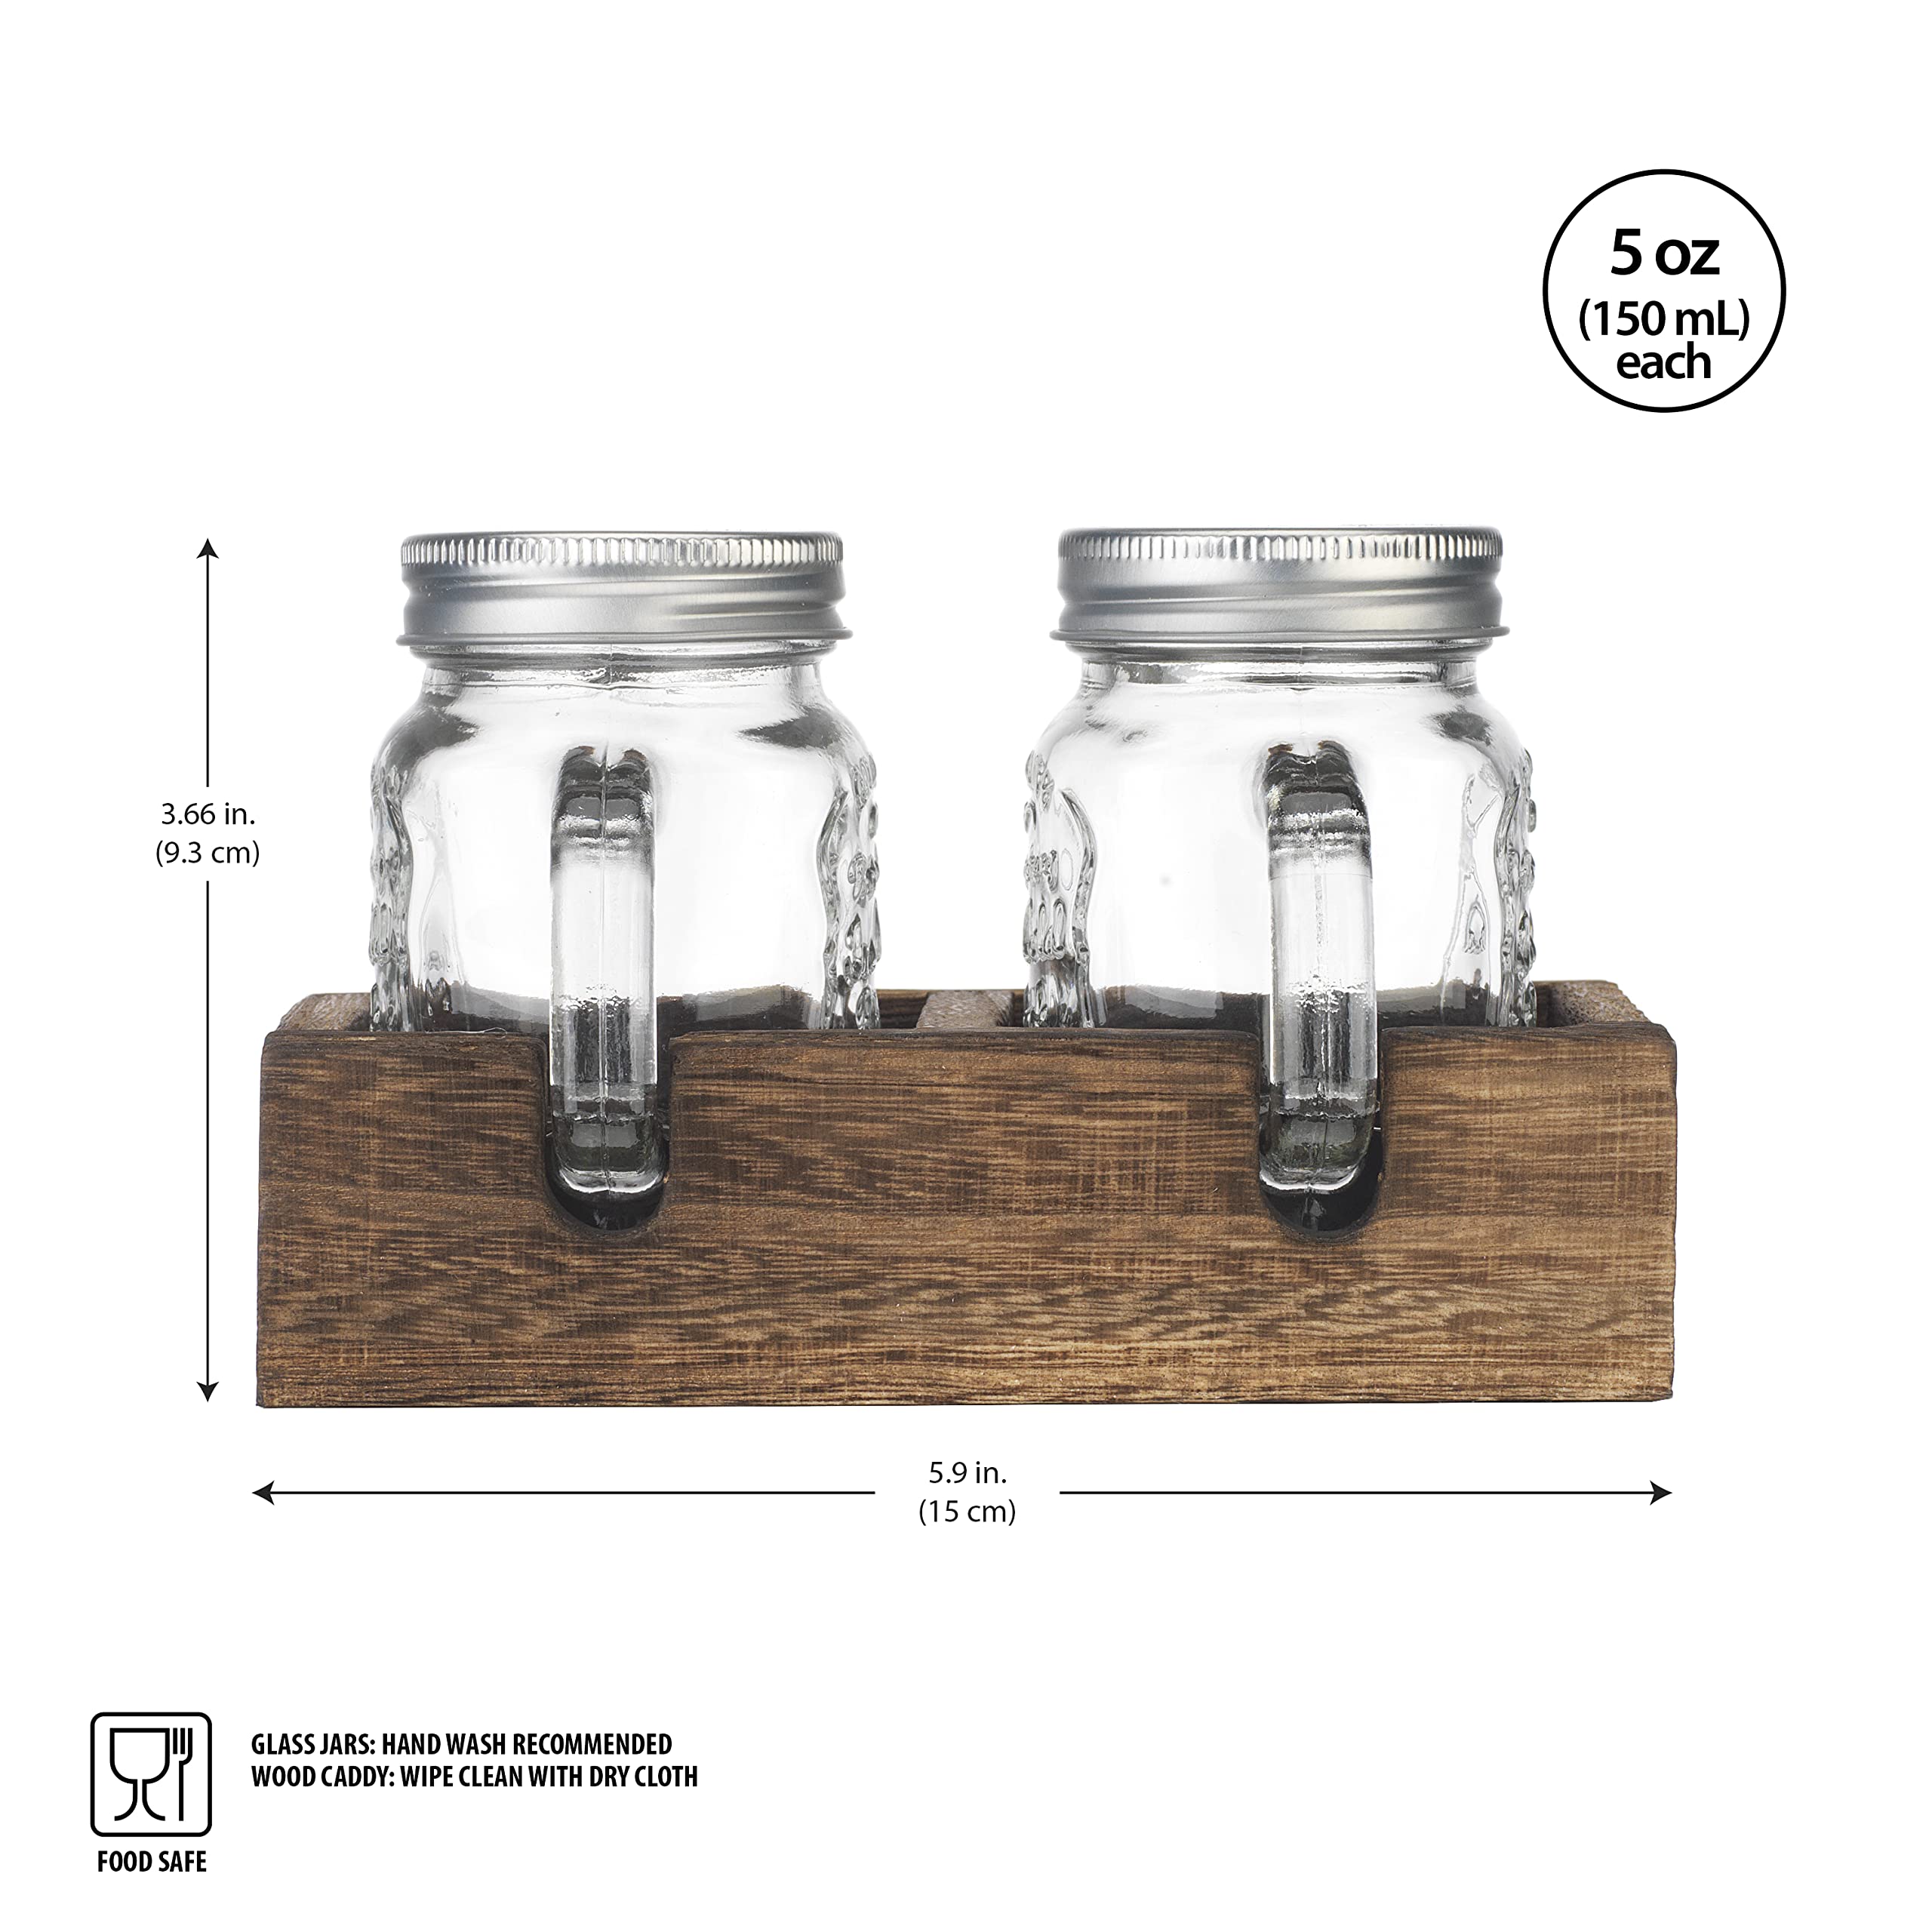 MosJos Mason Jar Salt and Pepper Shakers - Vintage Glass Condiment Dispenser Set with Wooden Holder Caddy - Farmhouse Kitchen Decor, Easy Refill 5-ounce Capacity with Stainless Steel Lids  - Acceptable